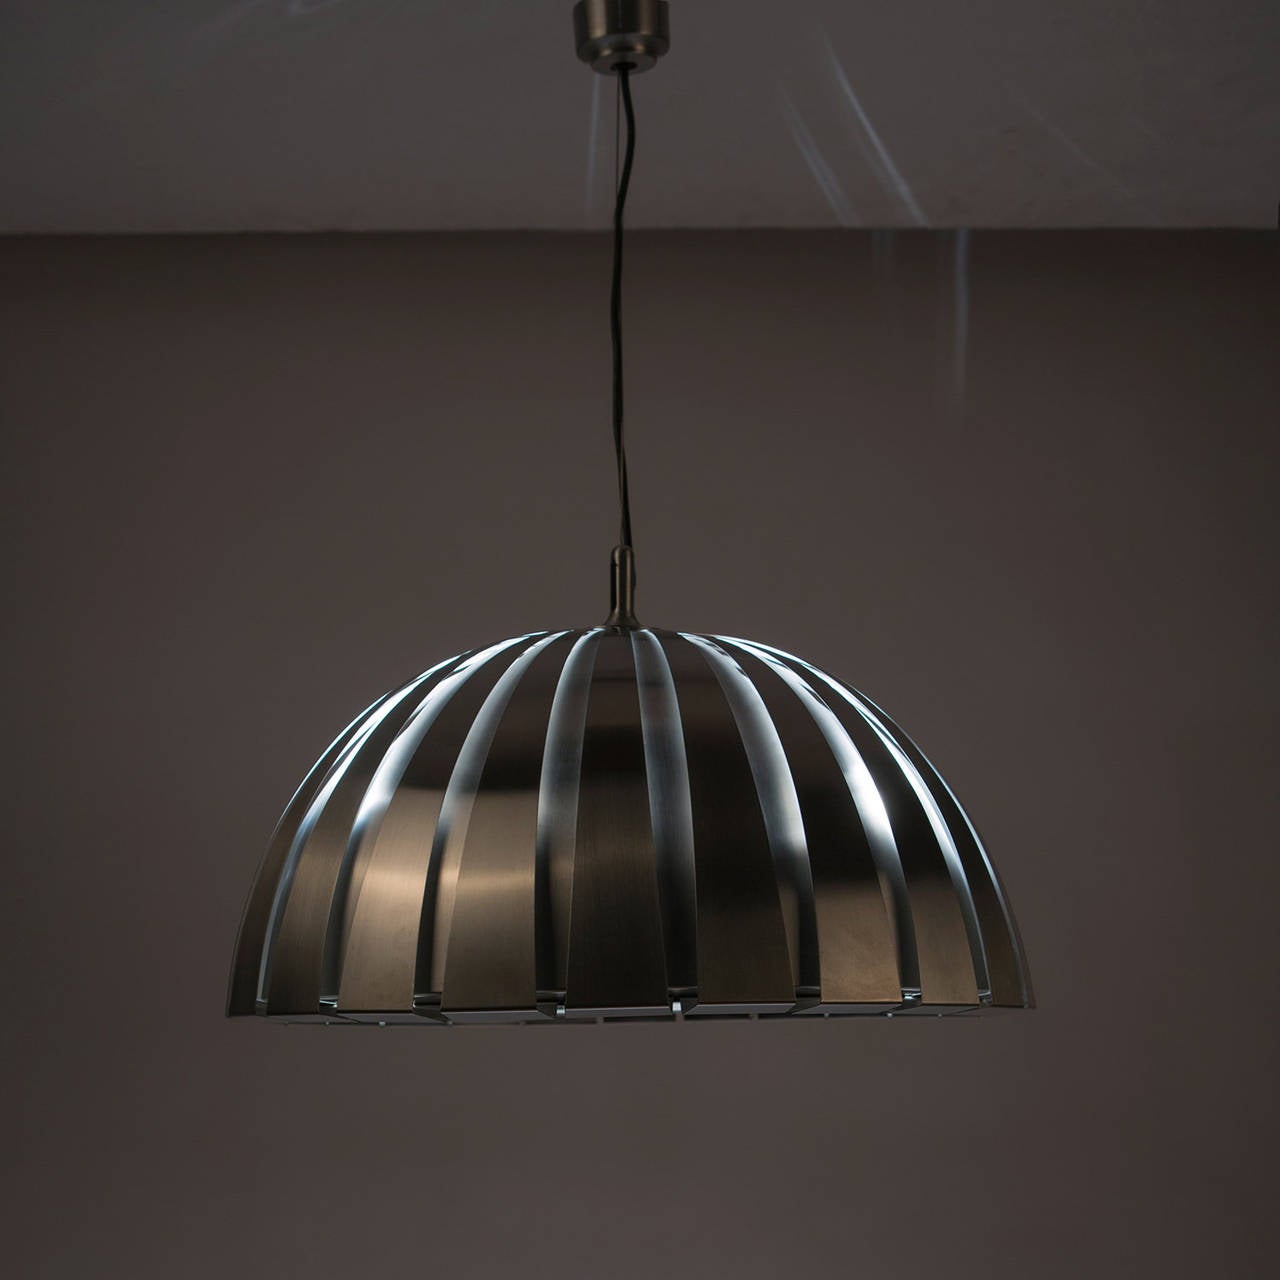 Mid-20th Century Set of Two Steel Ceiling Lamps by Elio Martinelli for Martinelli, Italy, 1960s For Sale